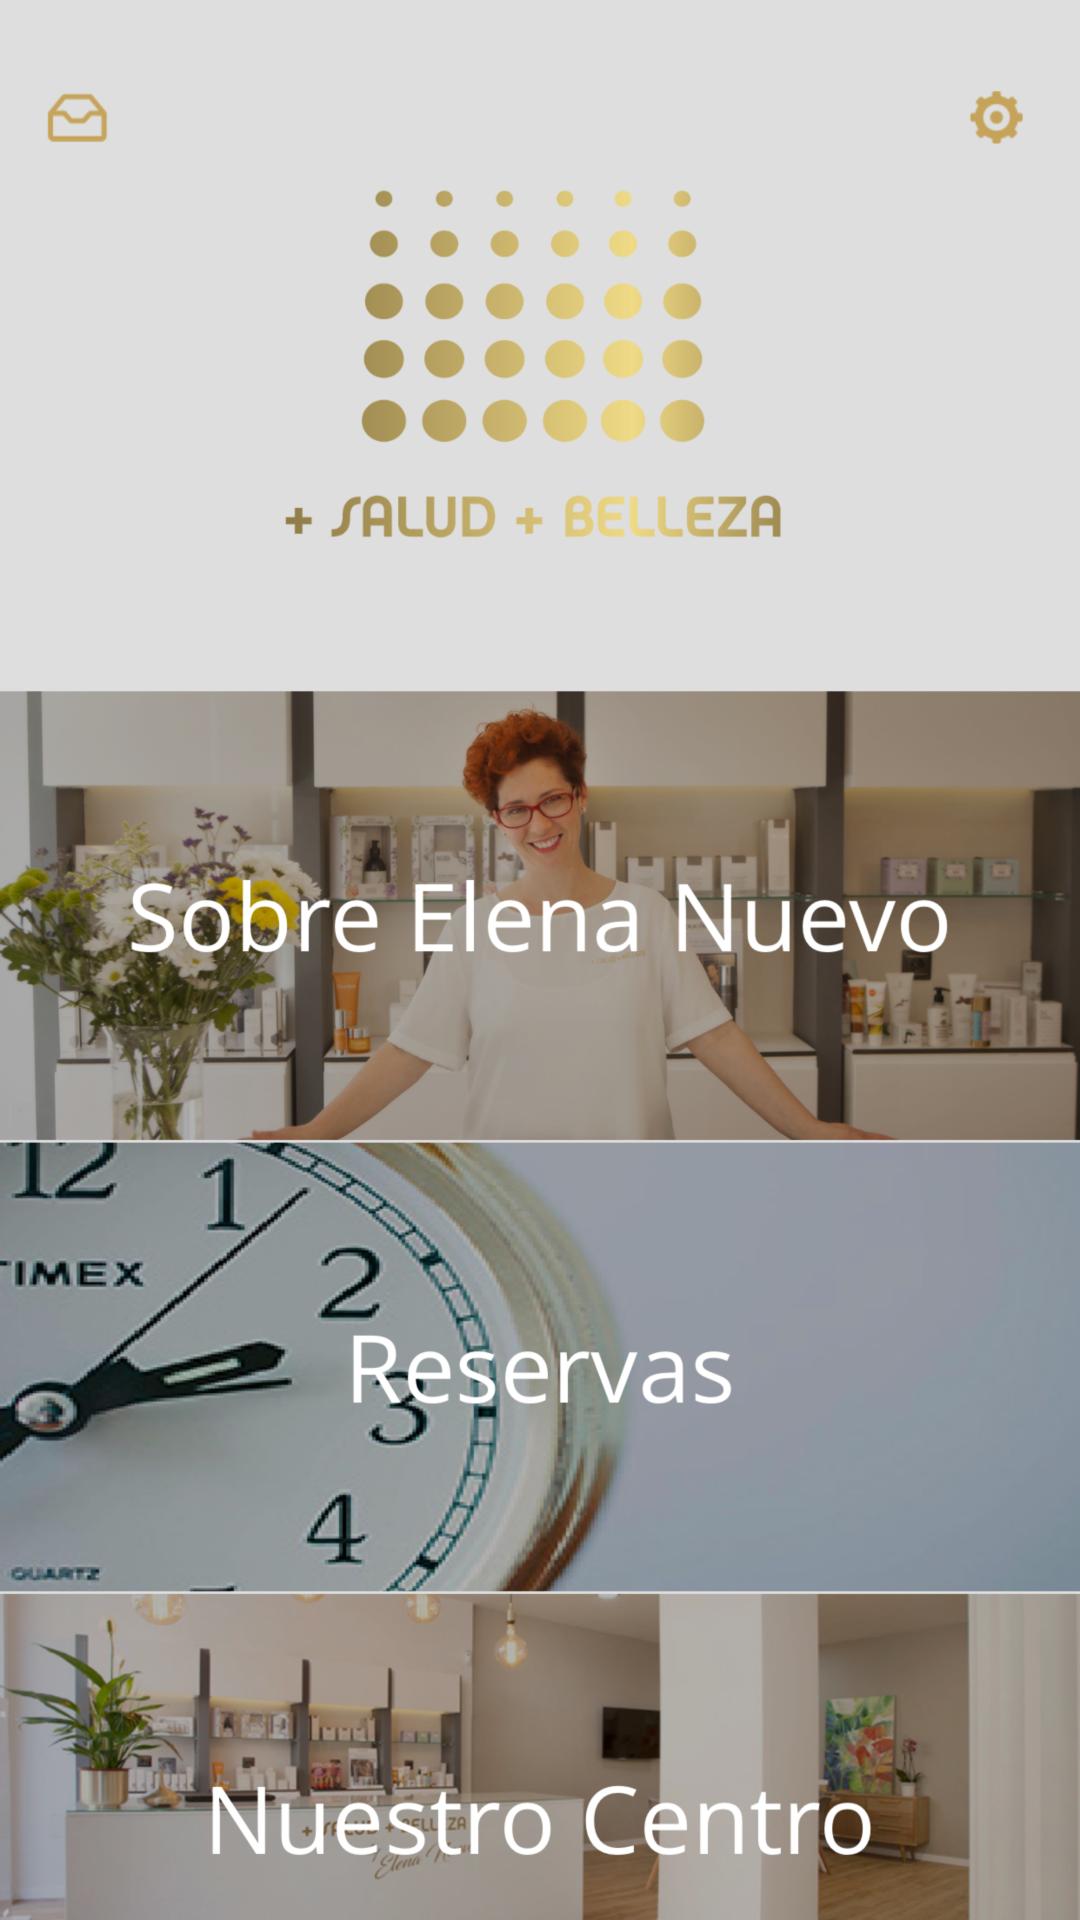 Salud +Belleza for Android - APK Download